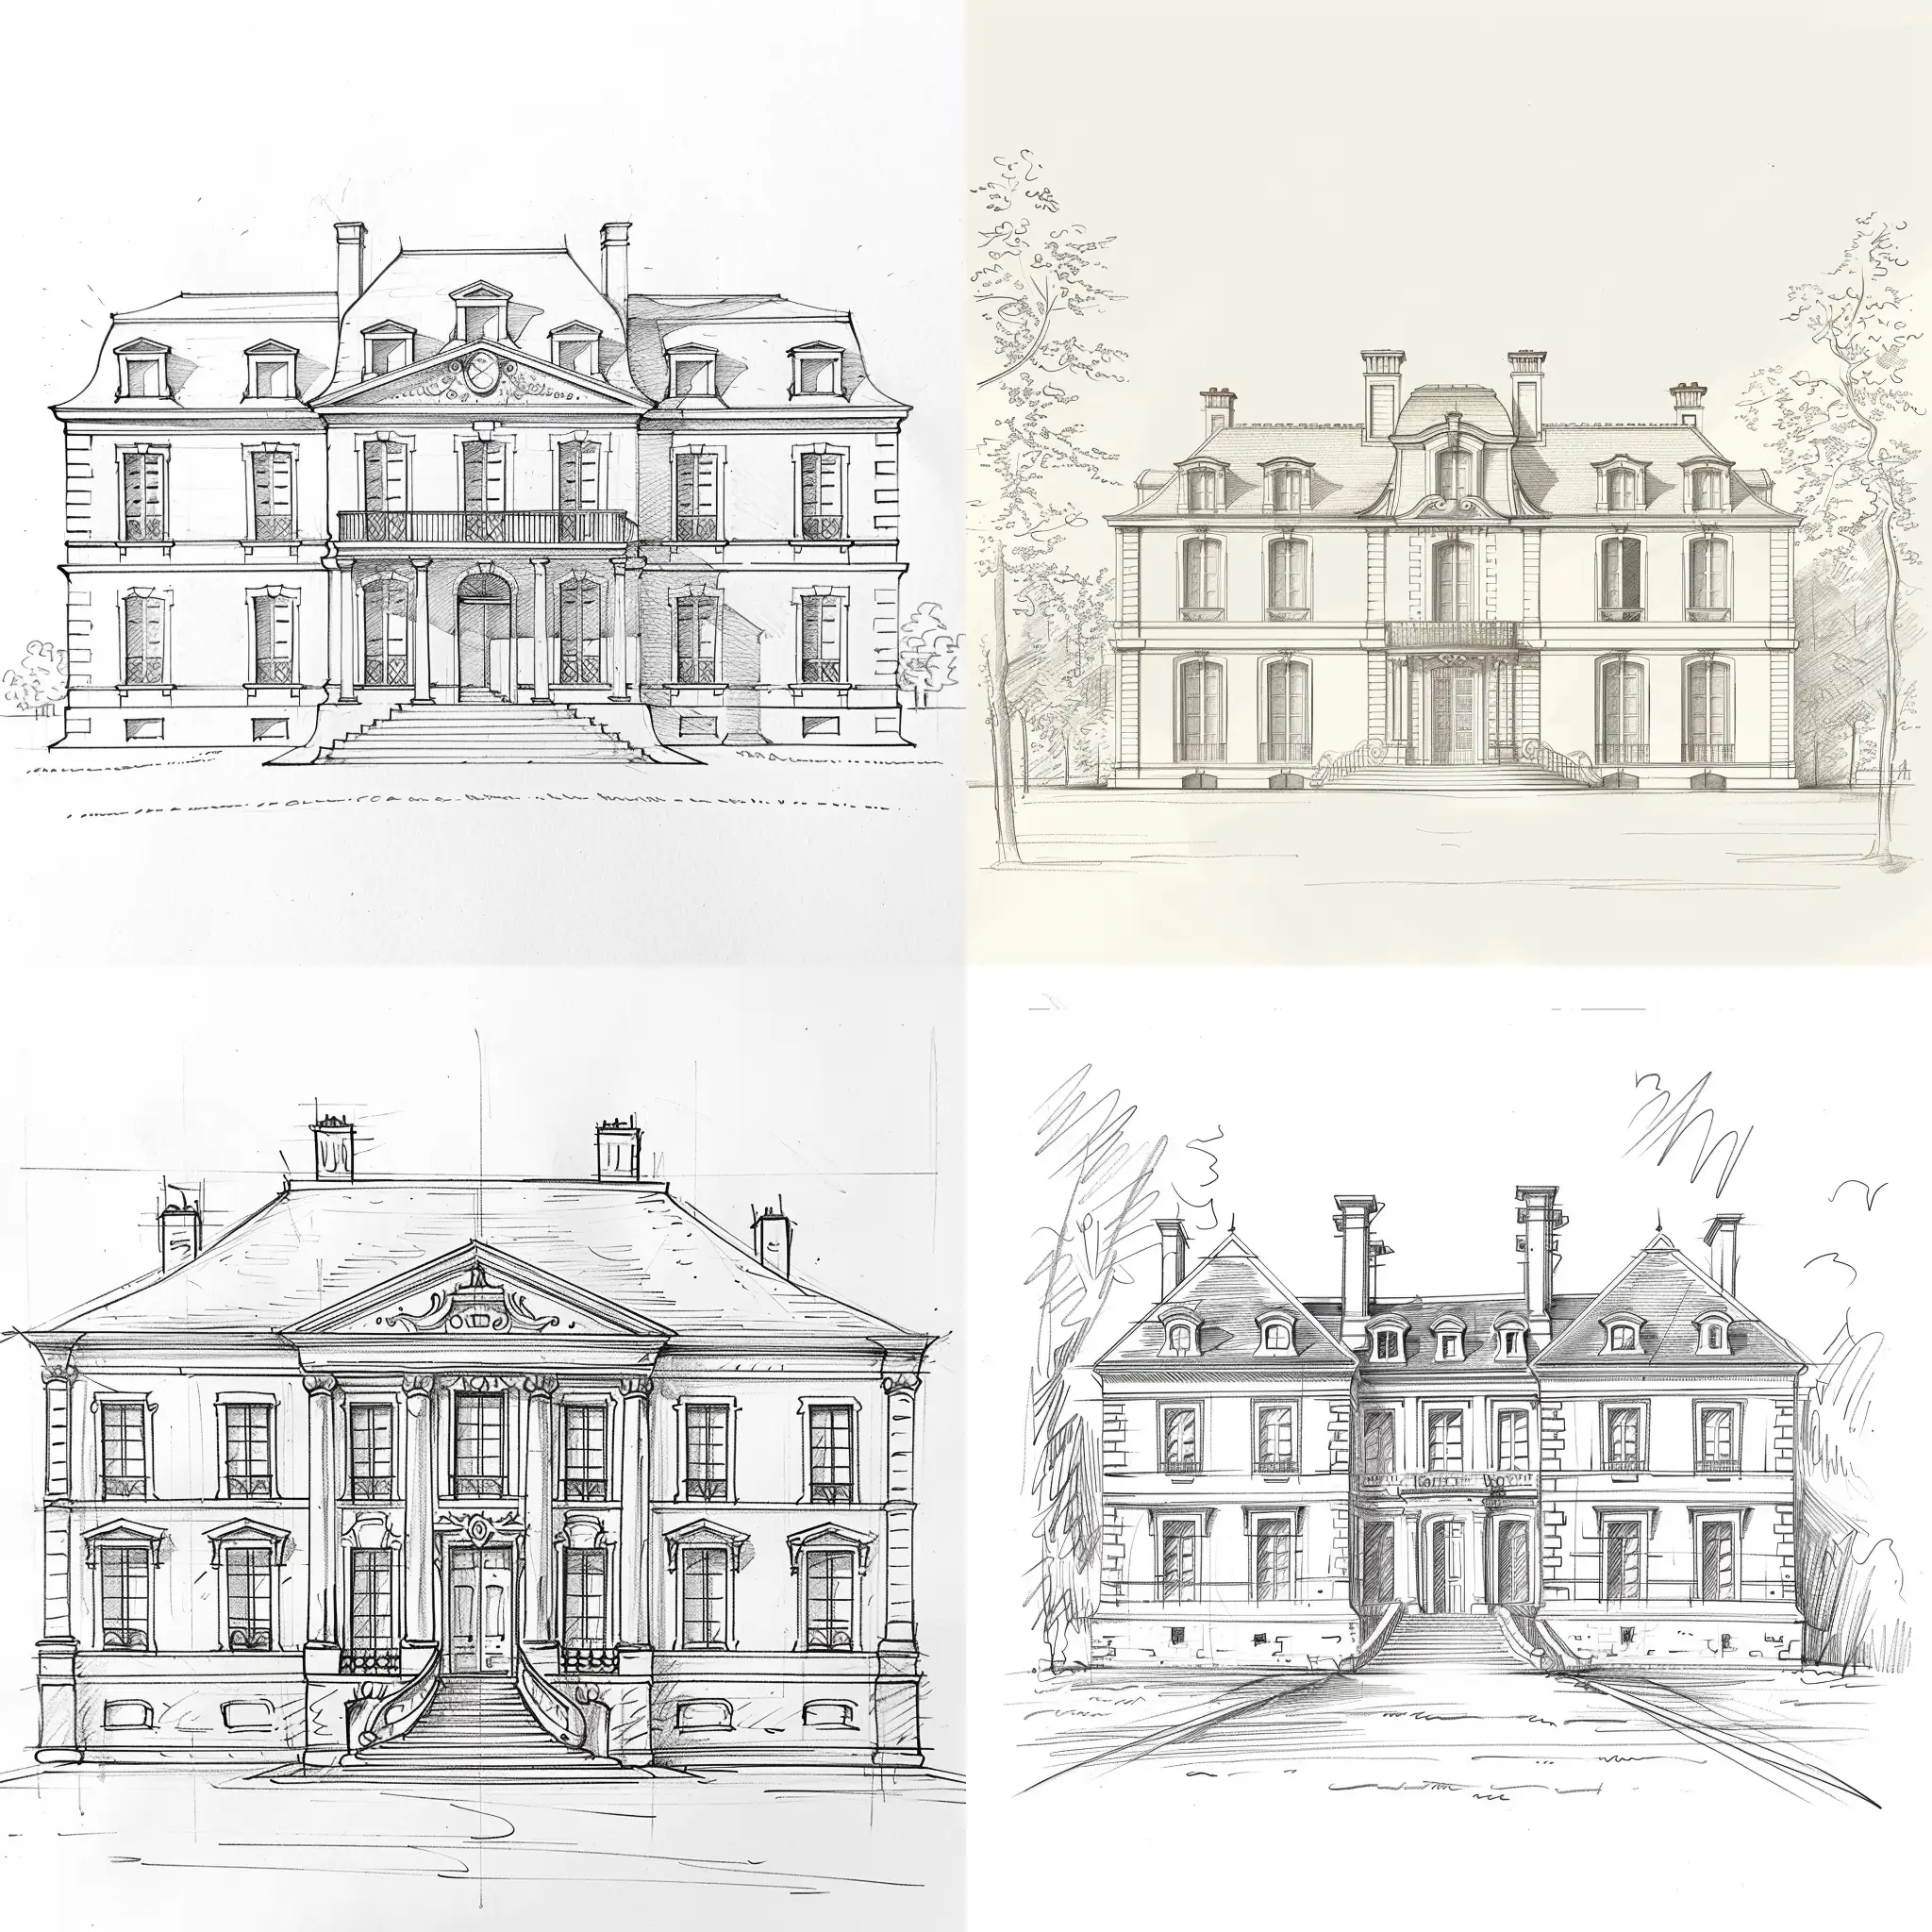 Stylized-French-Chateau-Sketch-18th-Century-Architectural-Design-with-Two-Wings-and-Central-Facade